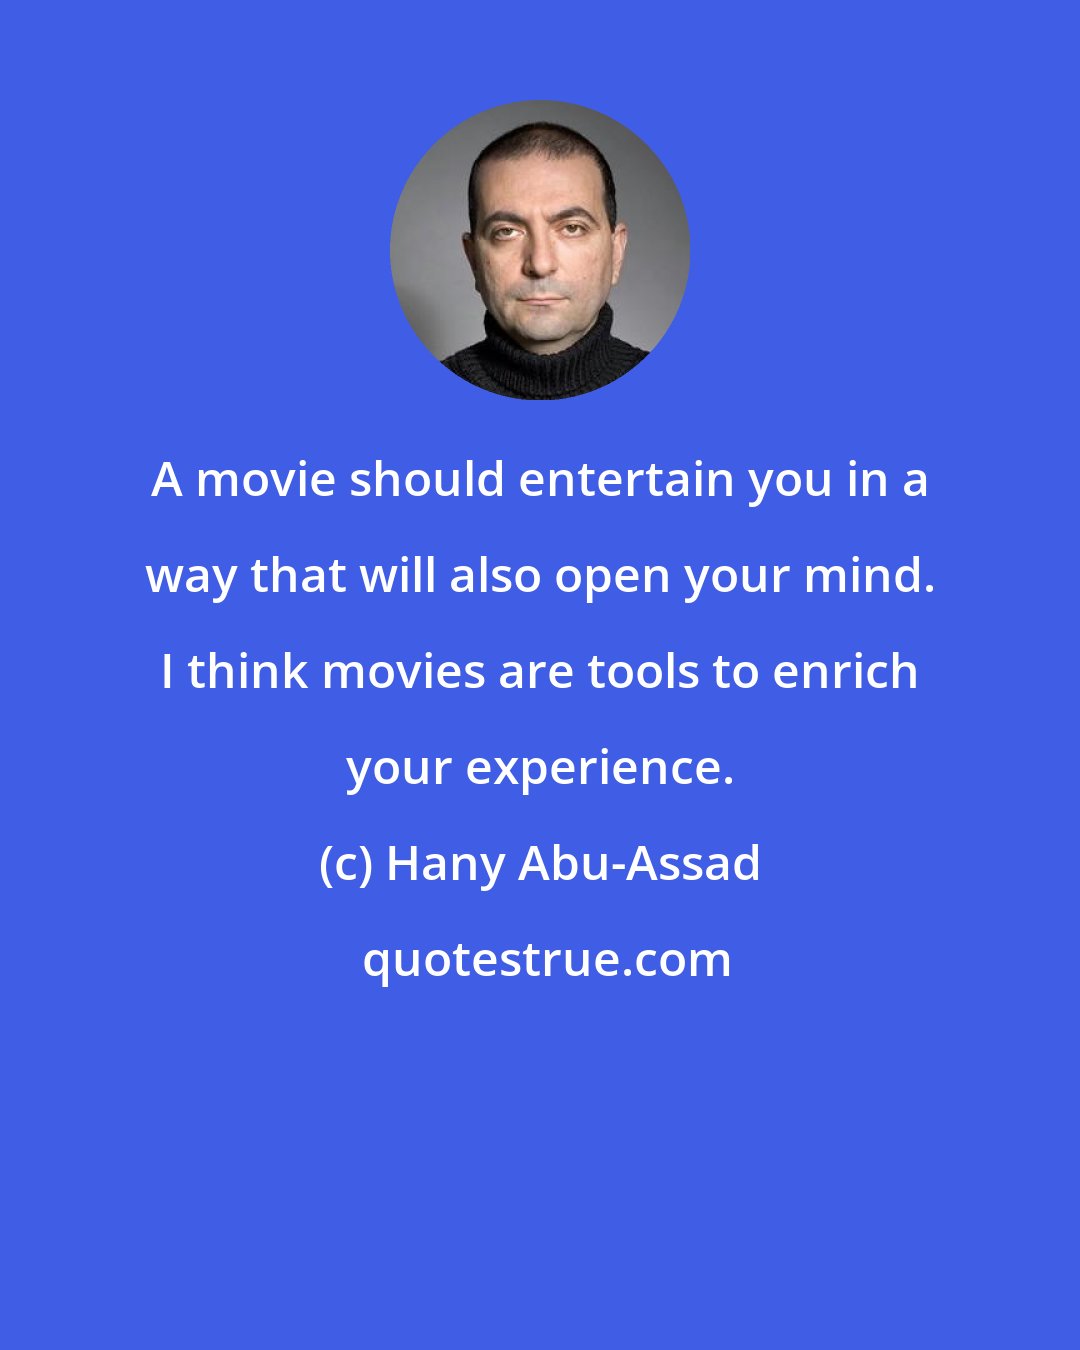 Hany Abu-Assad: A movie should entertain you in a way that will also open your mind. I think movies are tools to enrich your experience.